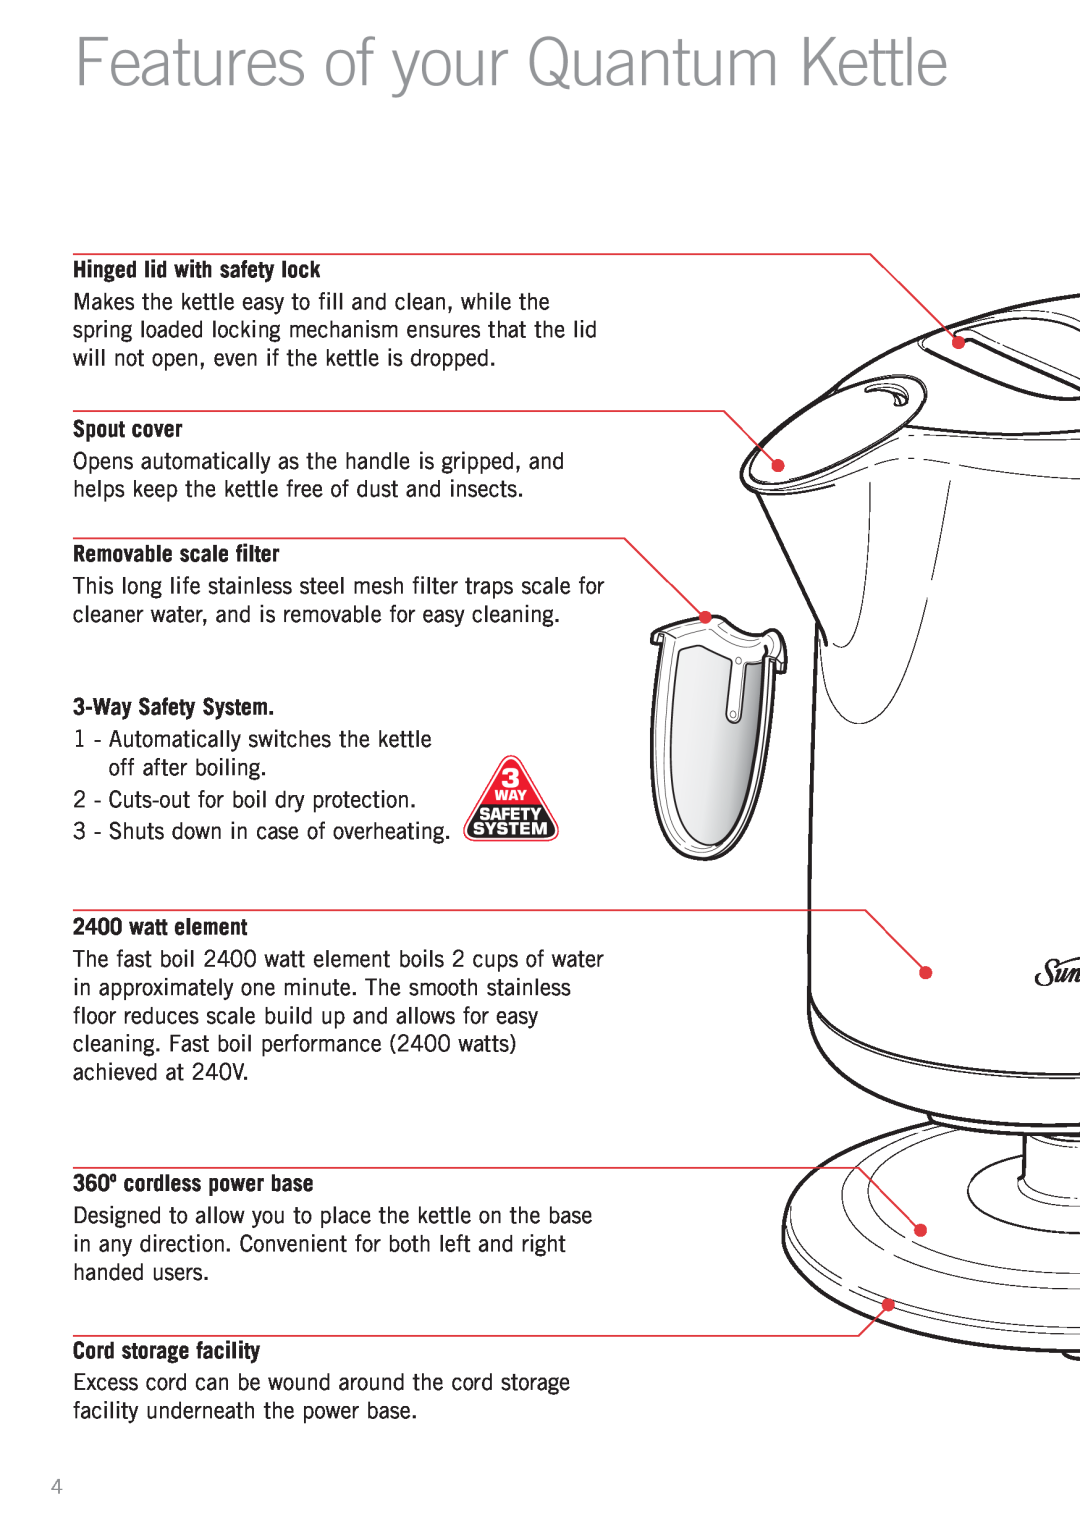 Sunbeam KE3560 manual Features of your Quantum Kettle, Hinged lid with safety lock, Spout cover, Removable scale filter 